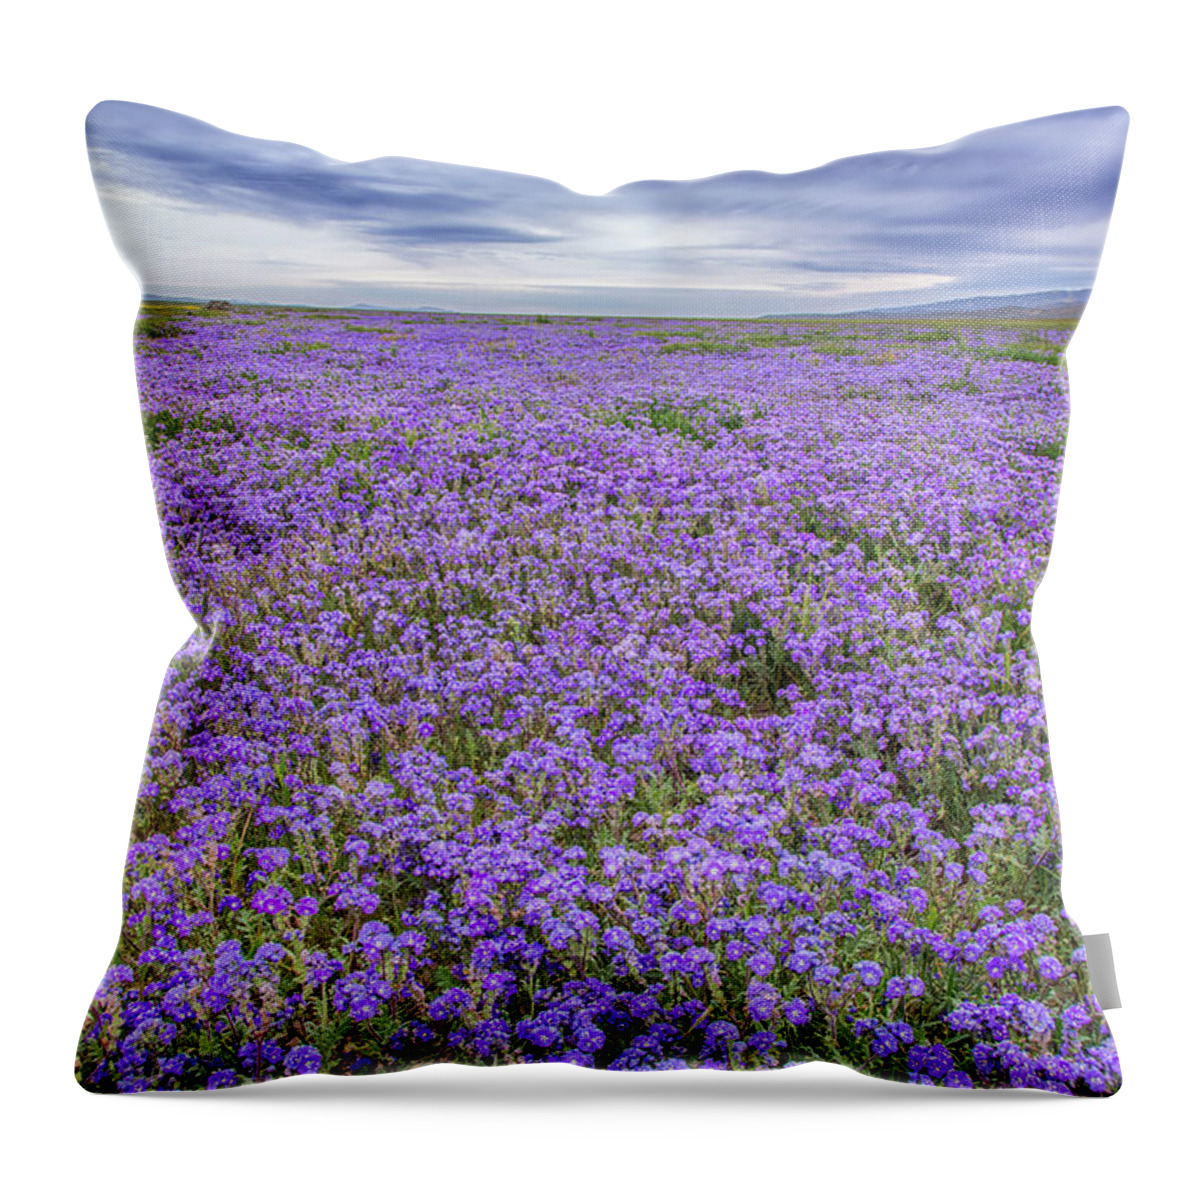 California Throw Pillow featuring the photograph Phacelia Field and Clouds by Marc Crumpler